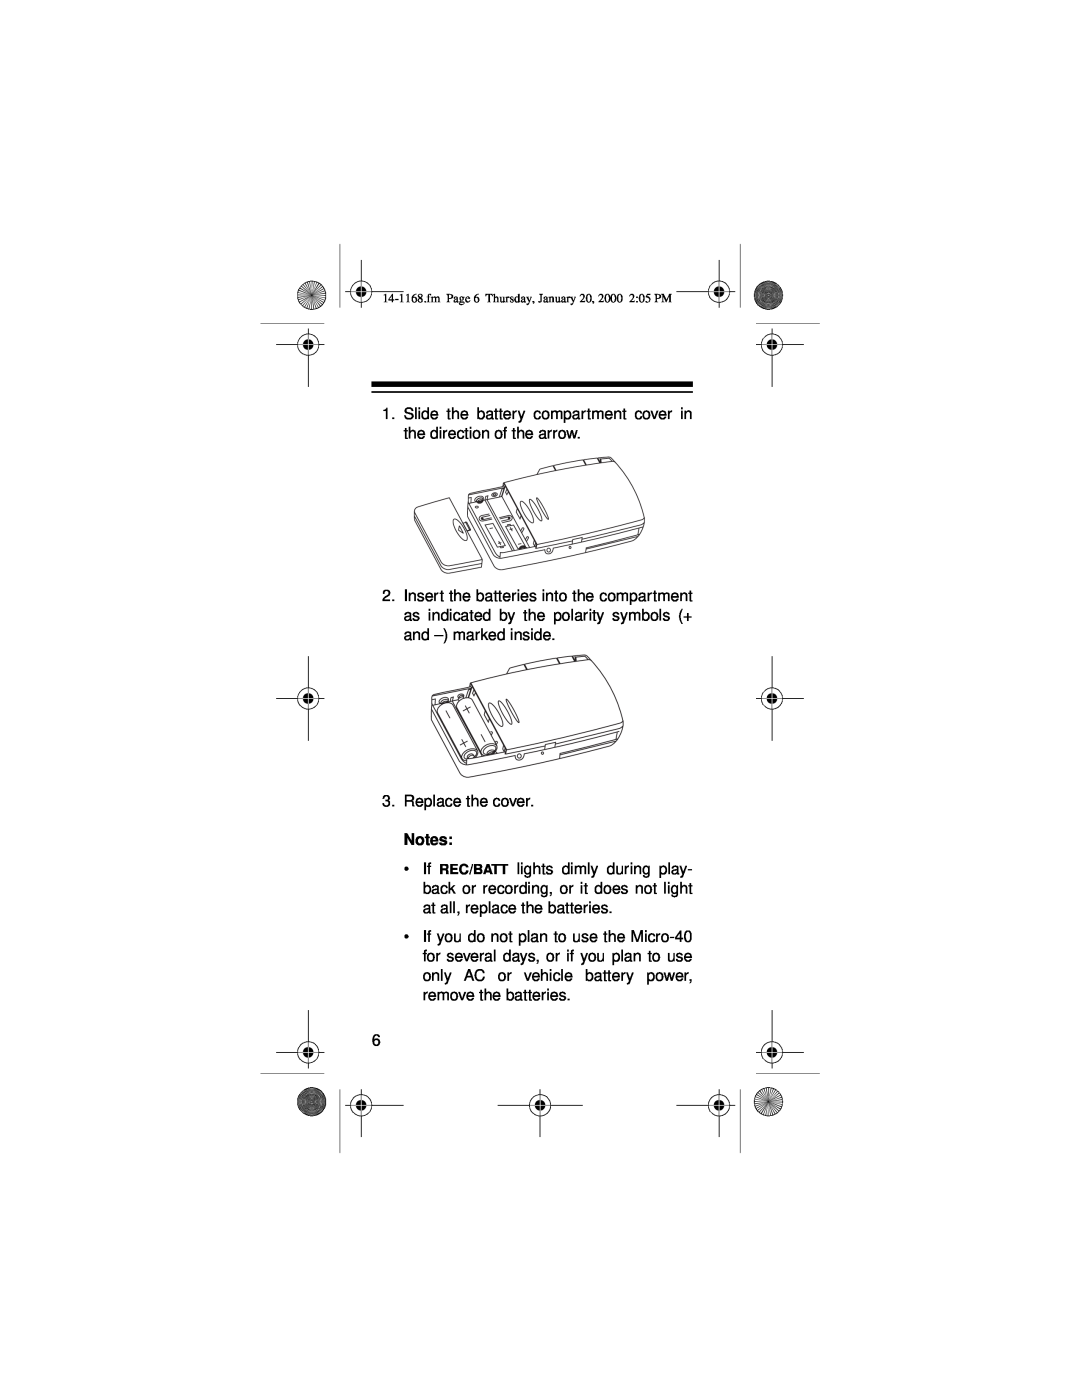 Optimus 14-1168, Micro-40 owner manual Slide the battery compartment cover in the direction of the arrow 